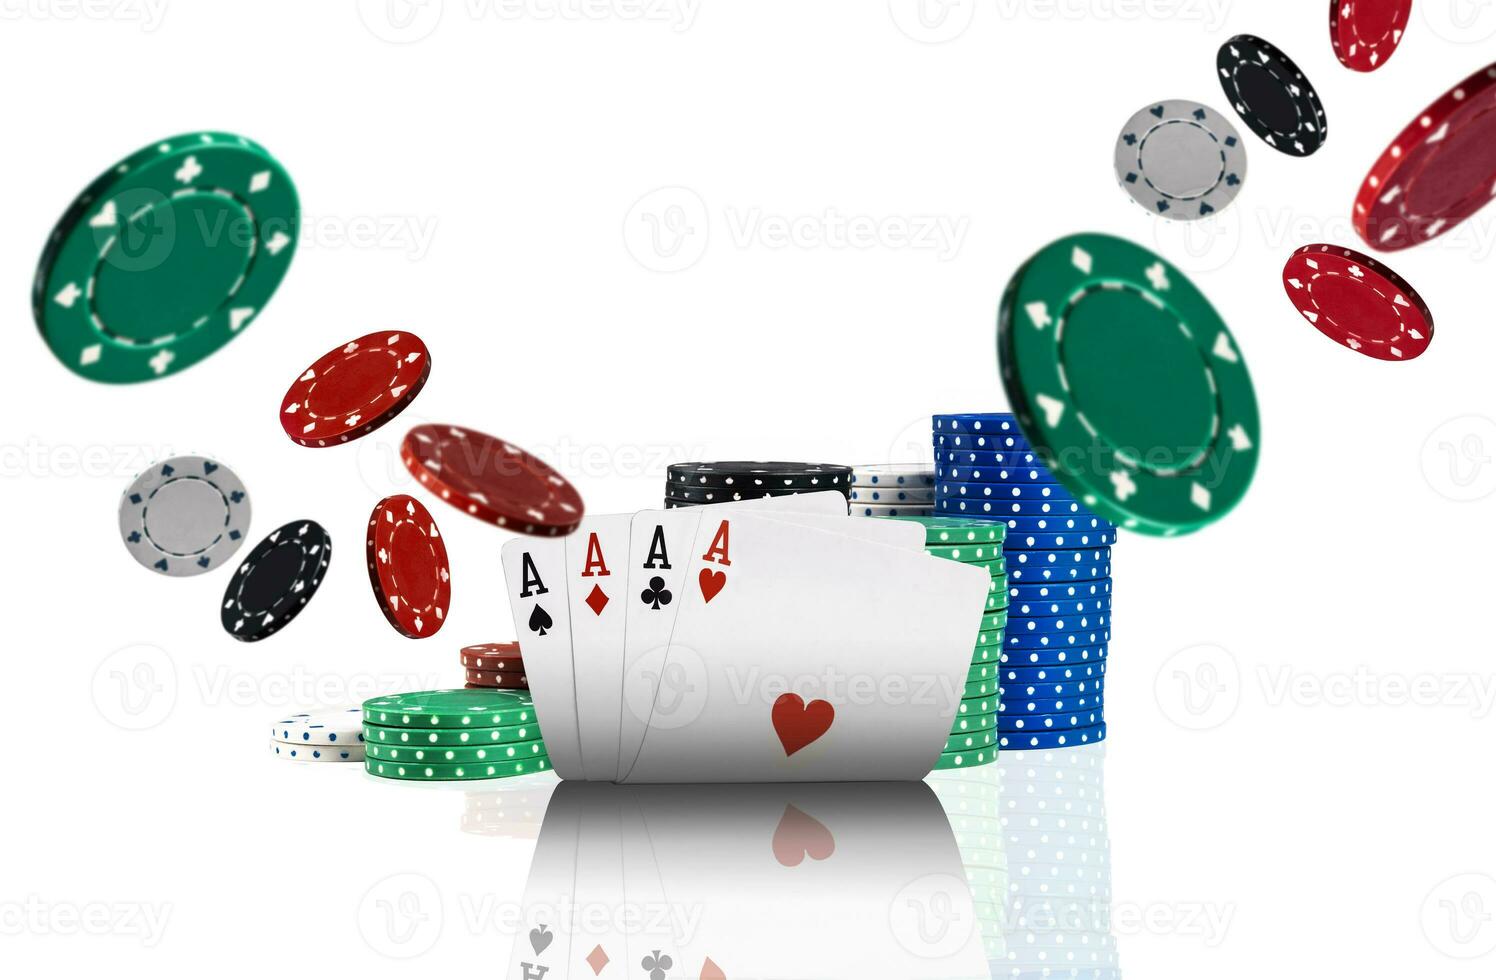 Close-up photo of four aces, colorful chips in piles standing behind and some of them are flying apart, isolated on white background.